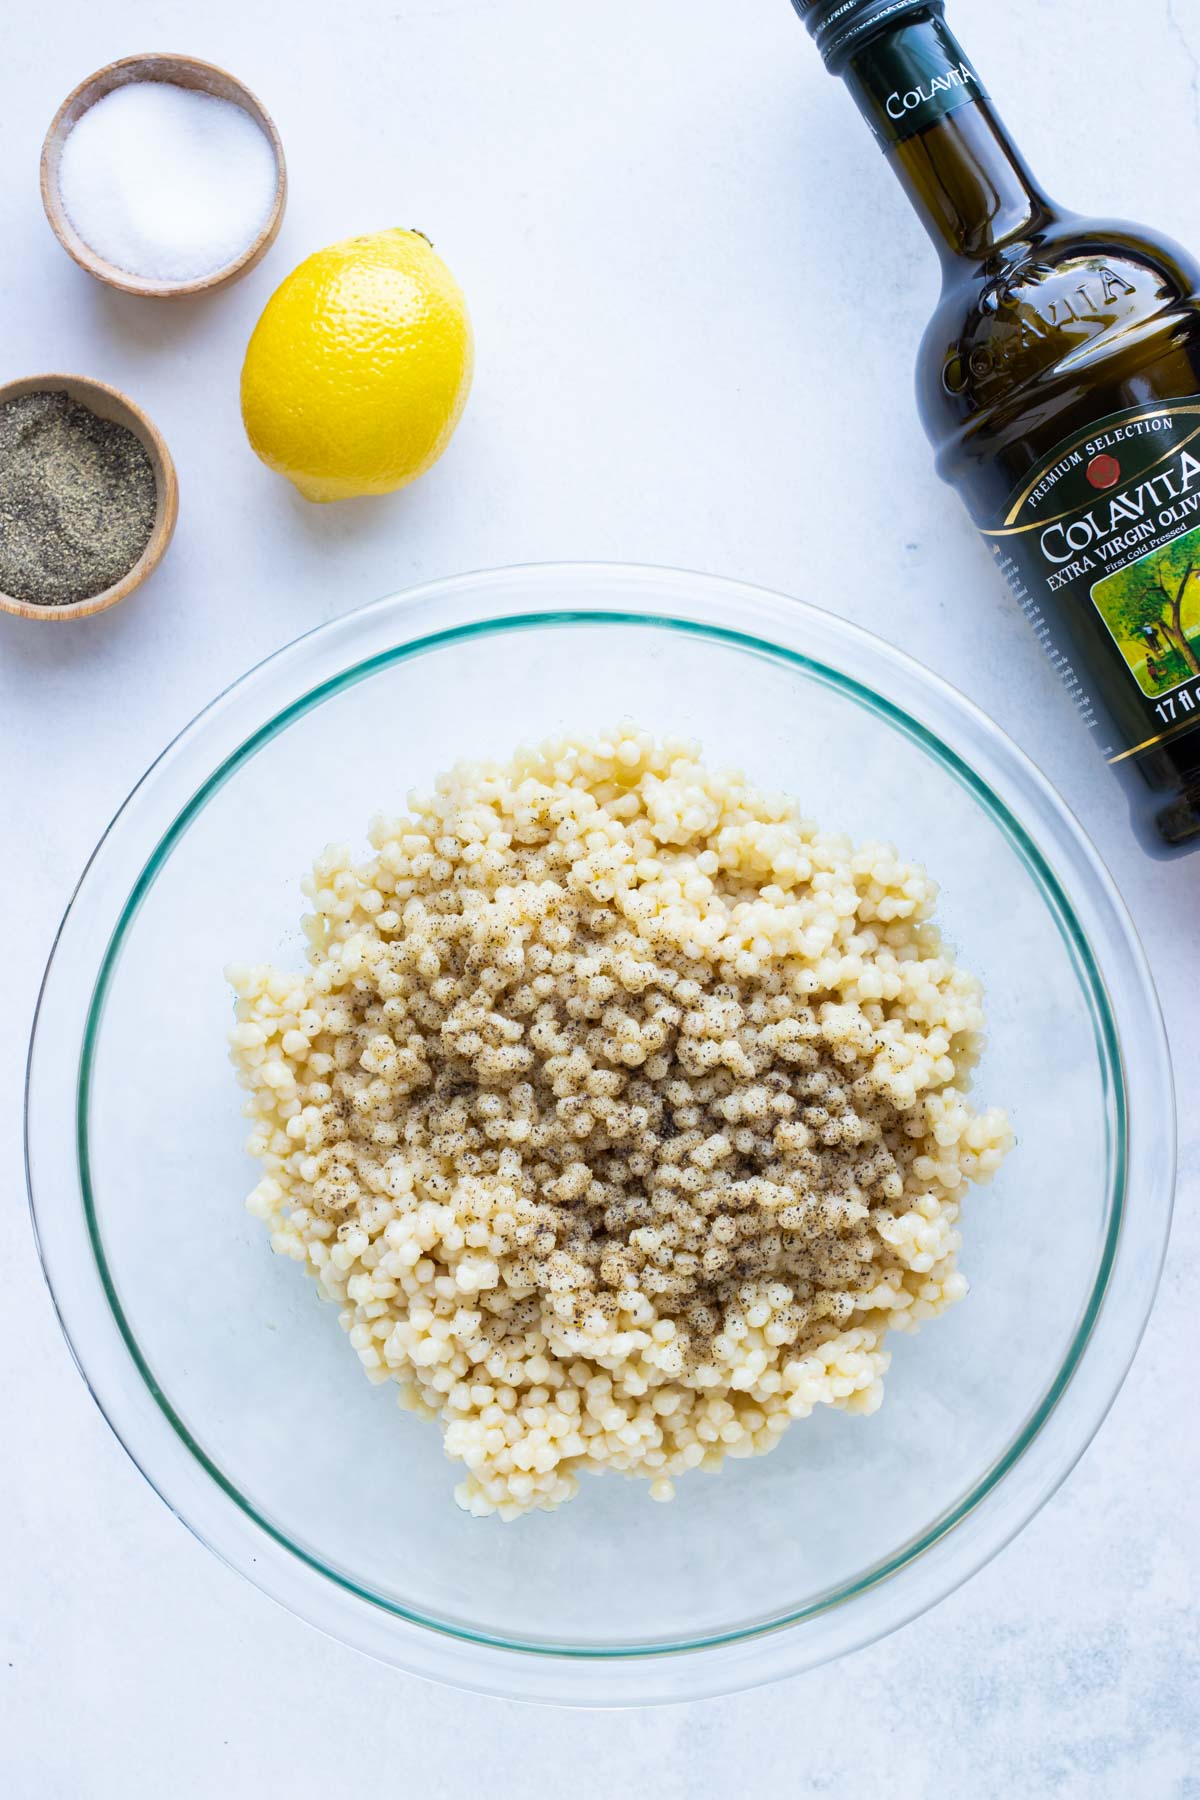 Cooked couscous is seasoned with oil, lemon, and salt.